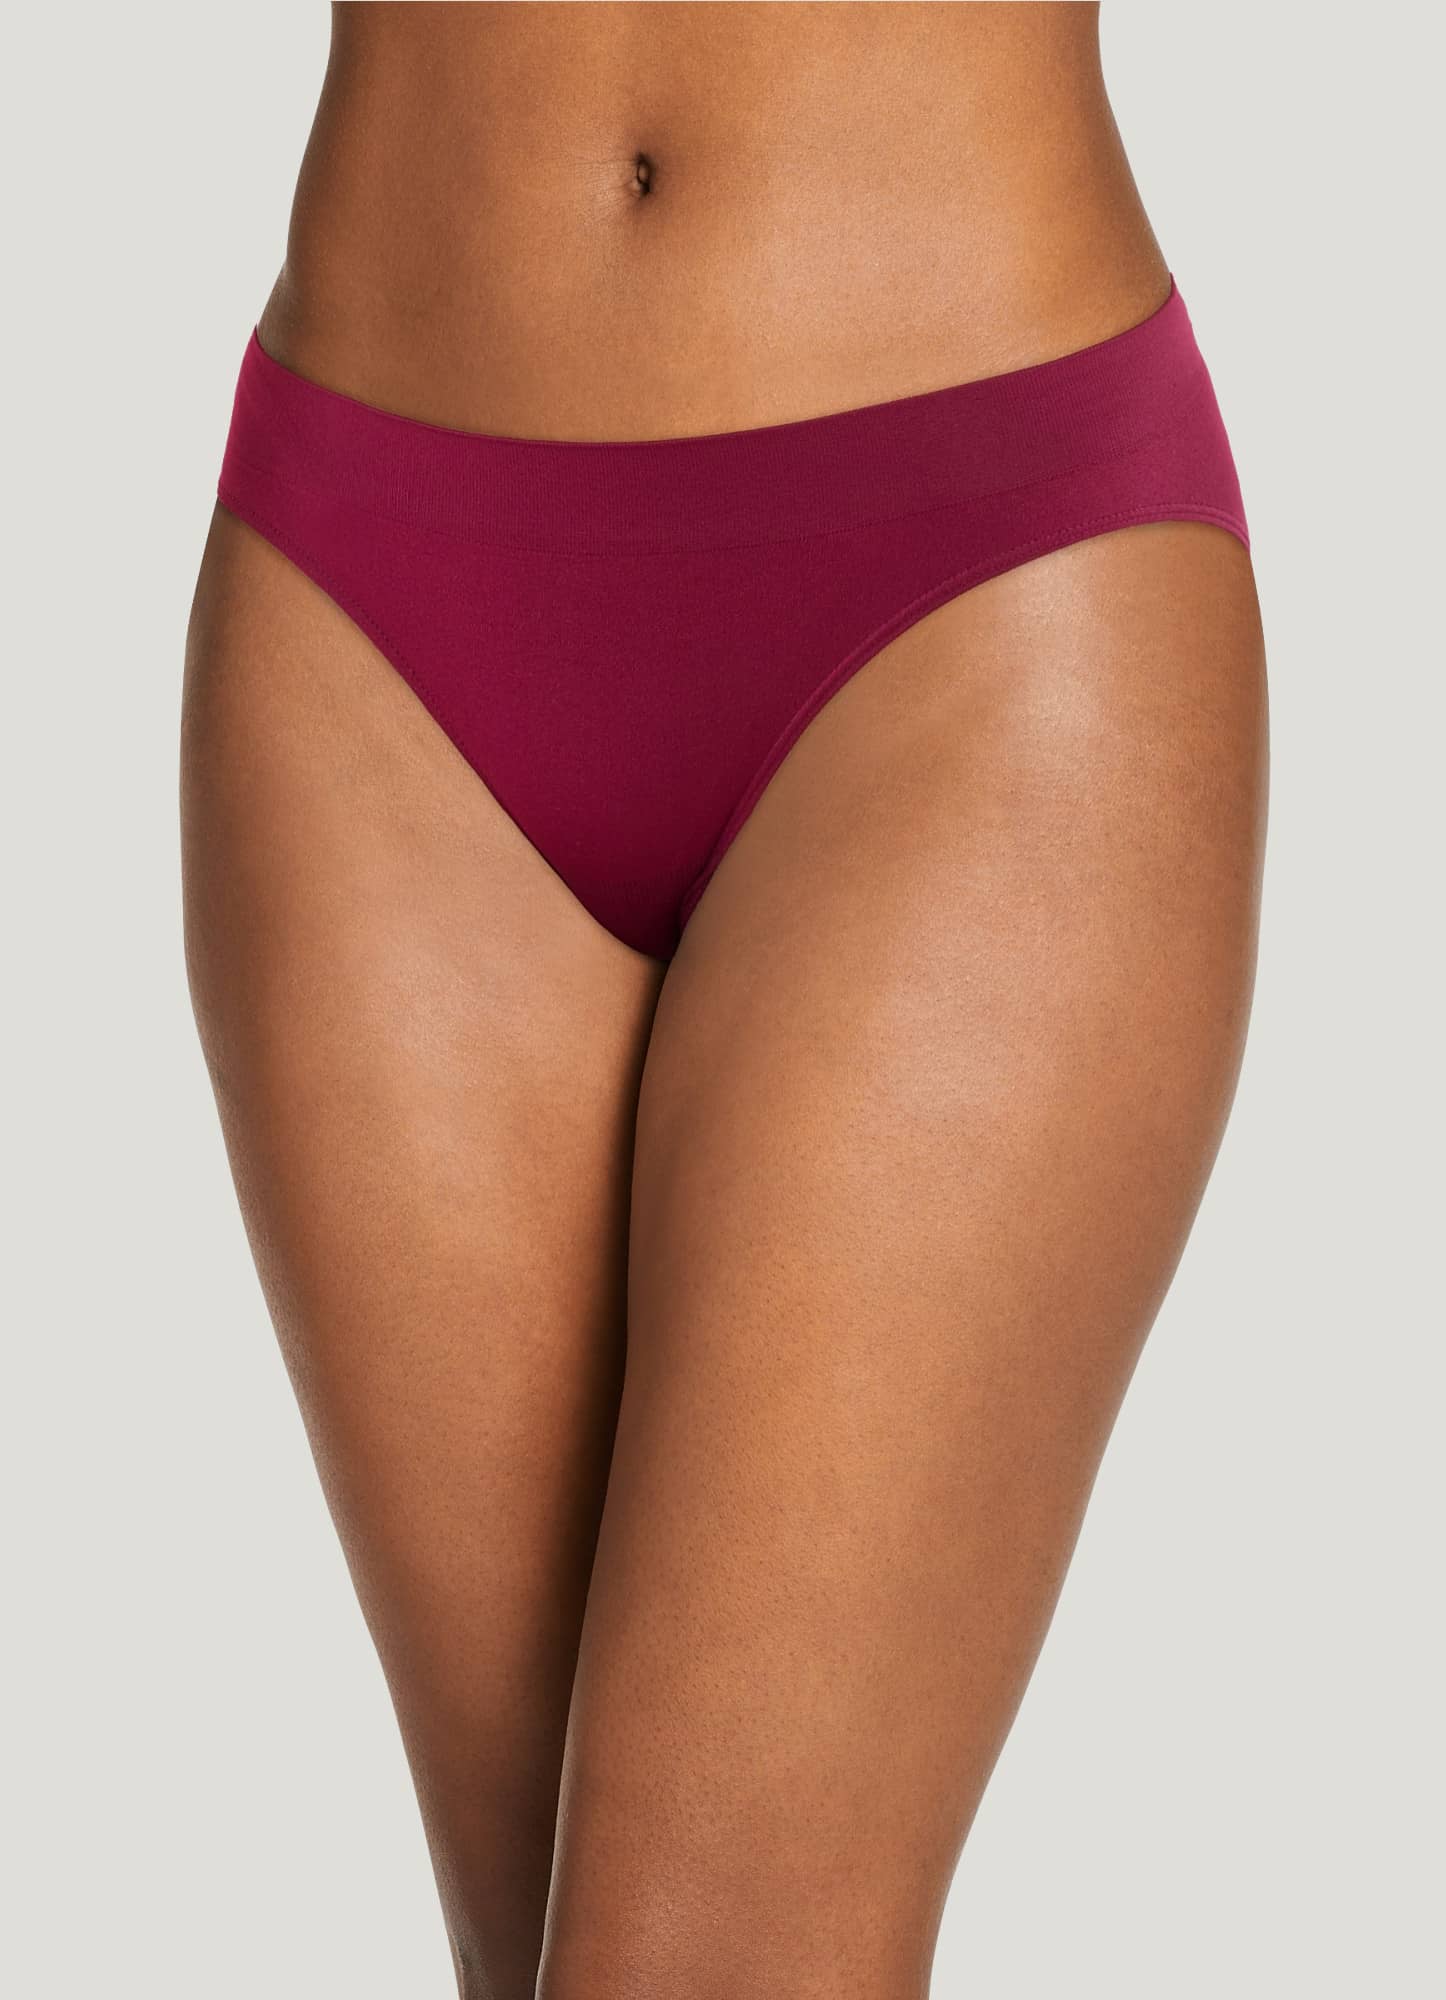 9 Types of Sexy Underwear You Should Try – Micro Bikini Store